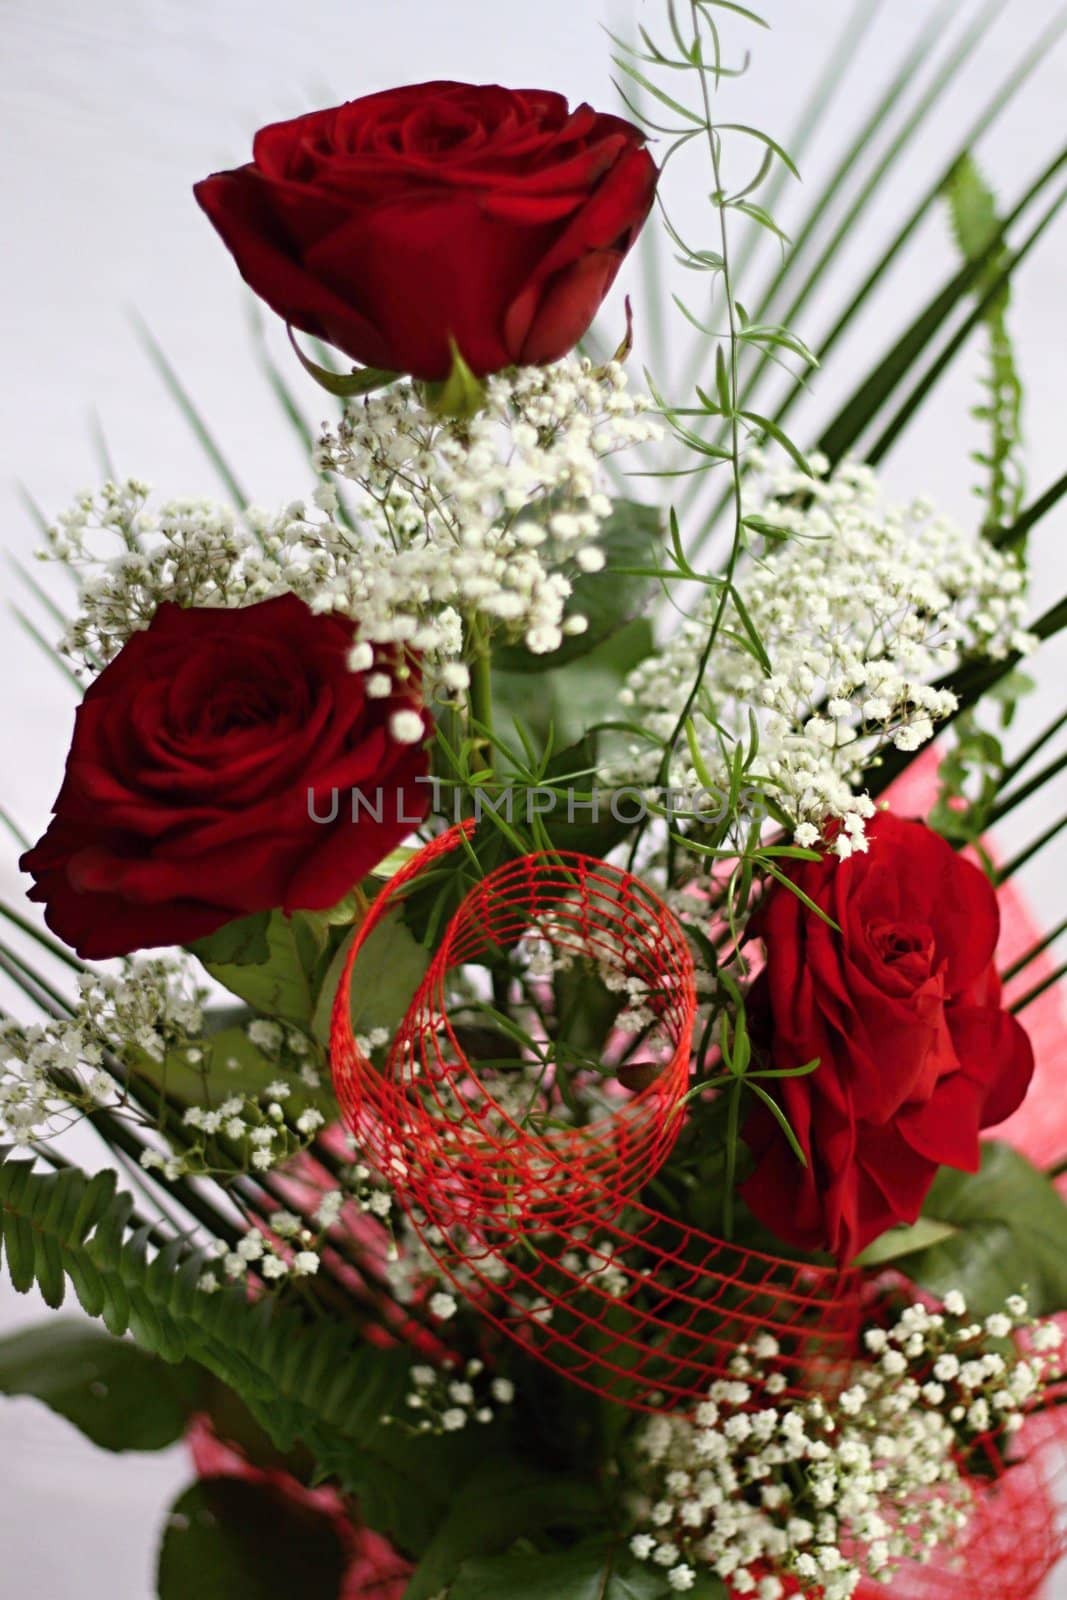 Three red roses and whitte flowers with green leafs